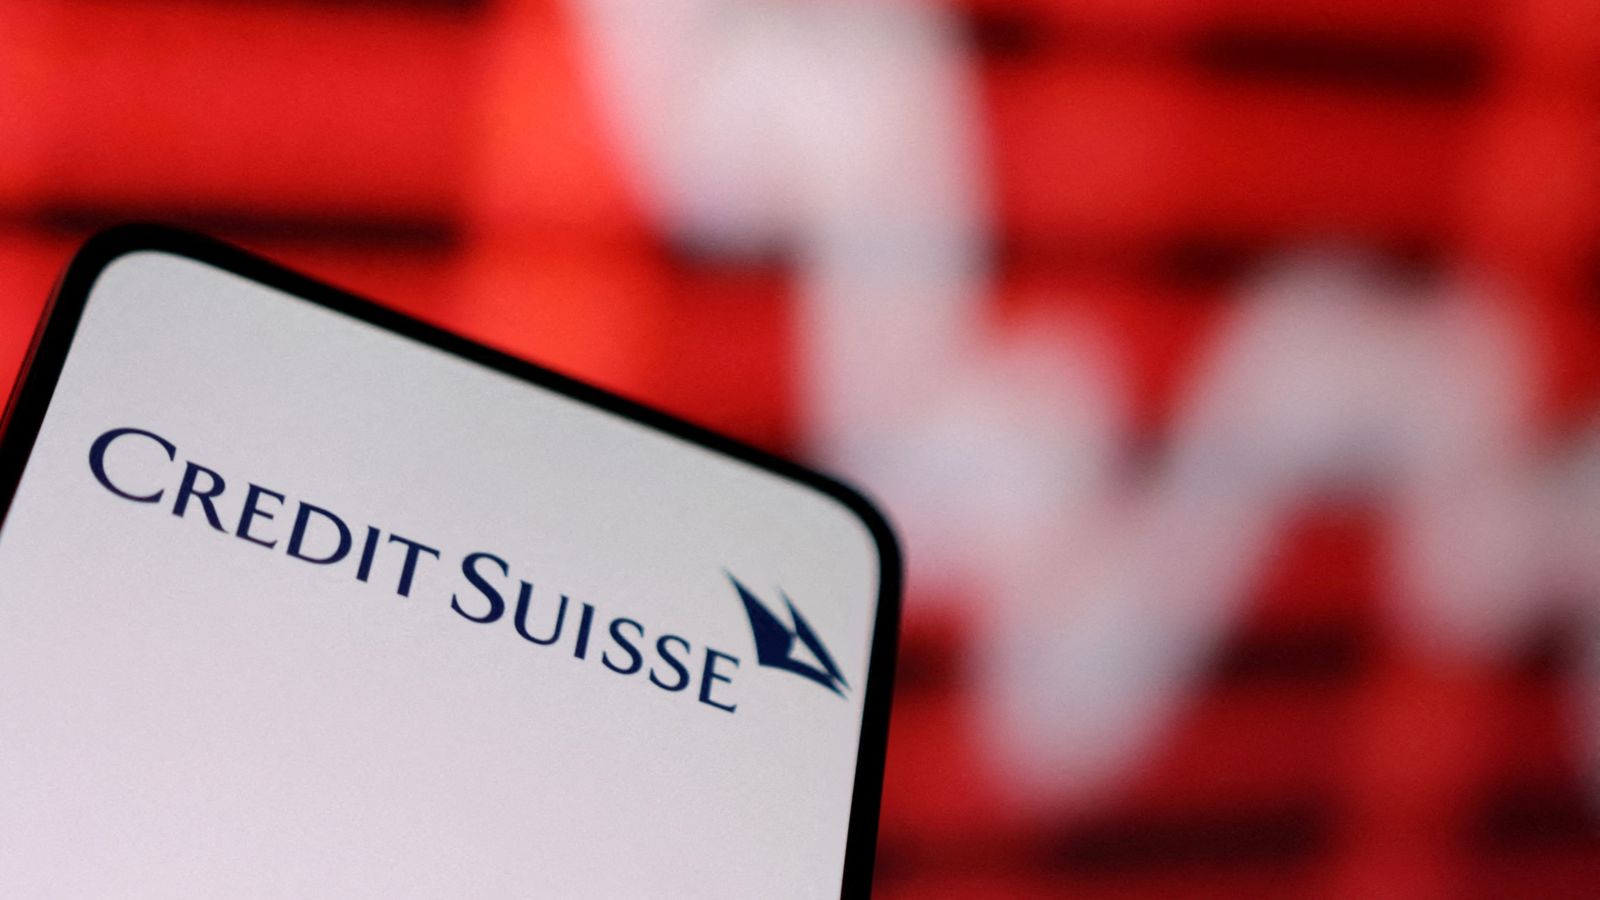 Swiss government to hold news conference on Credit Suisse after UBS takeover offer - reports